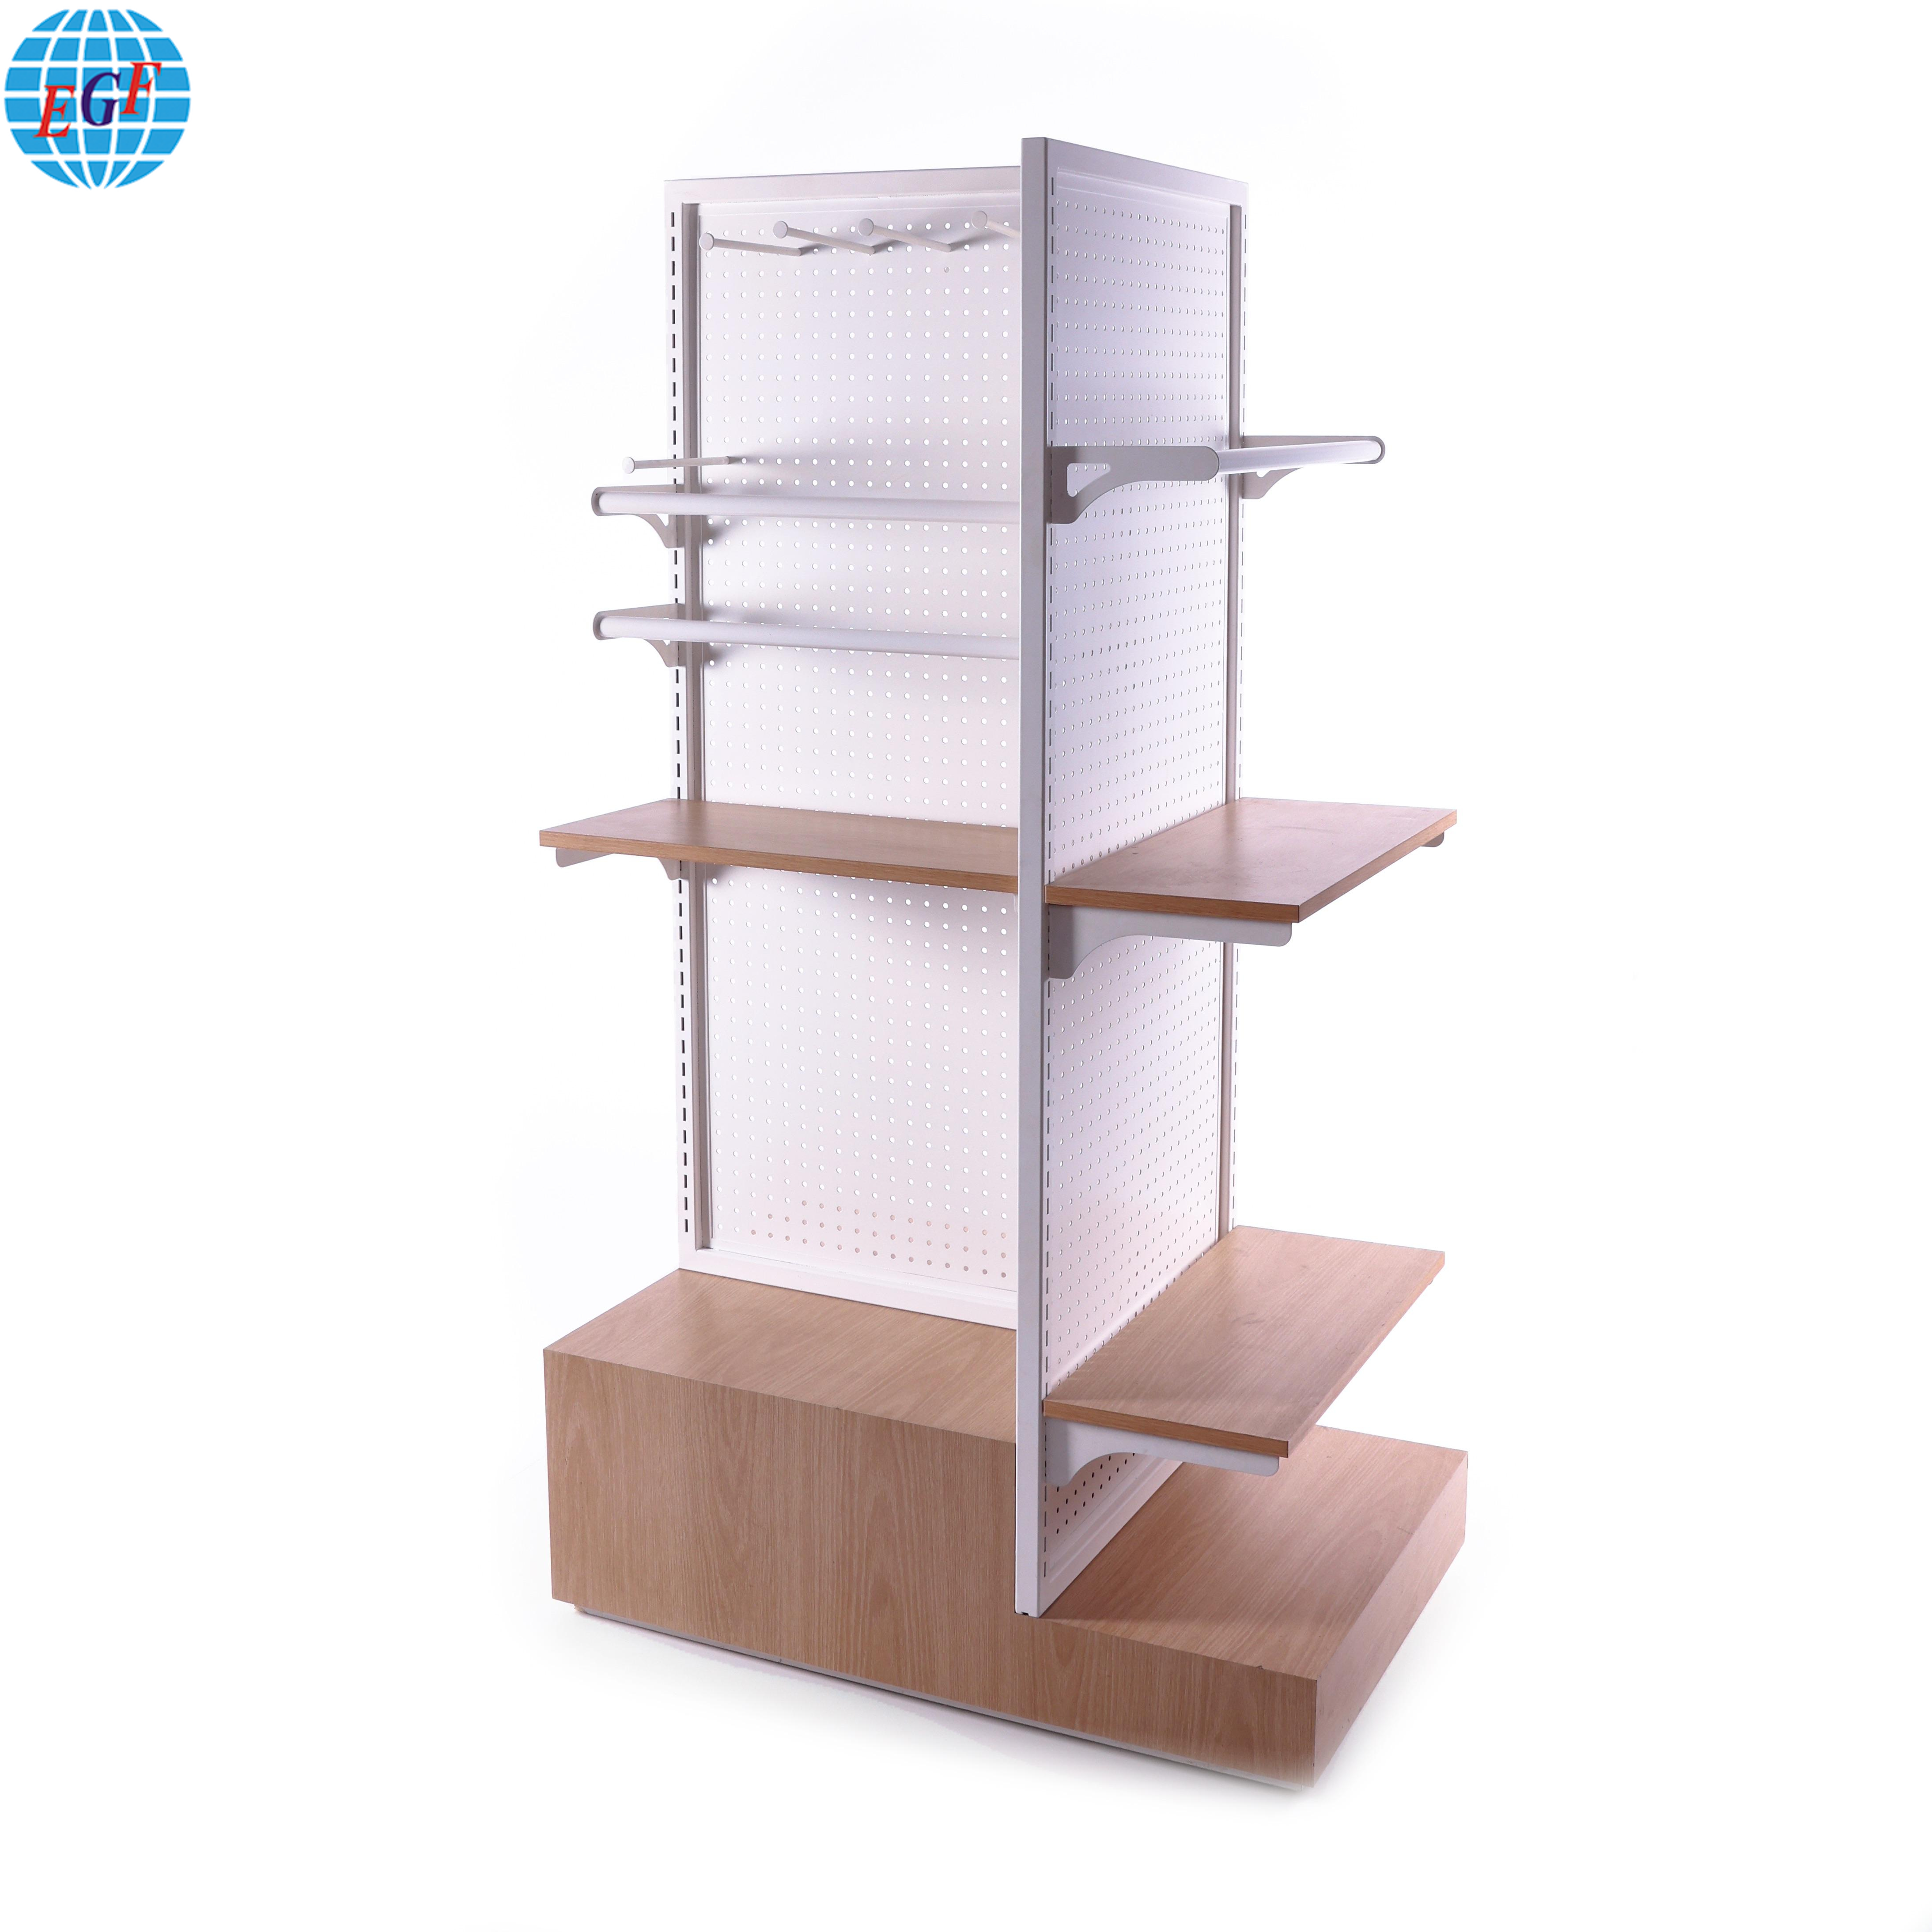 "High-Quality Clothing Store Iron-Wood Floor Standing Hanging Display Rack, Customizable"



